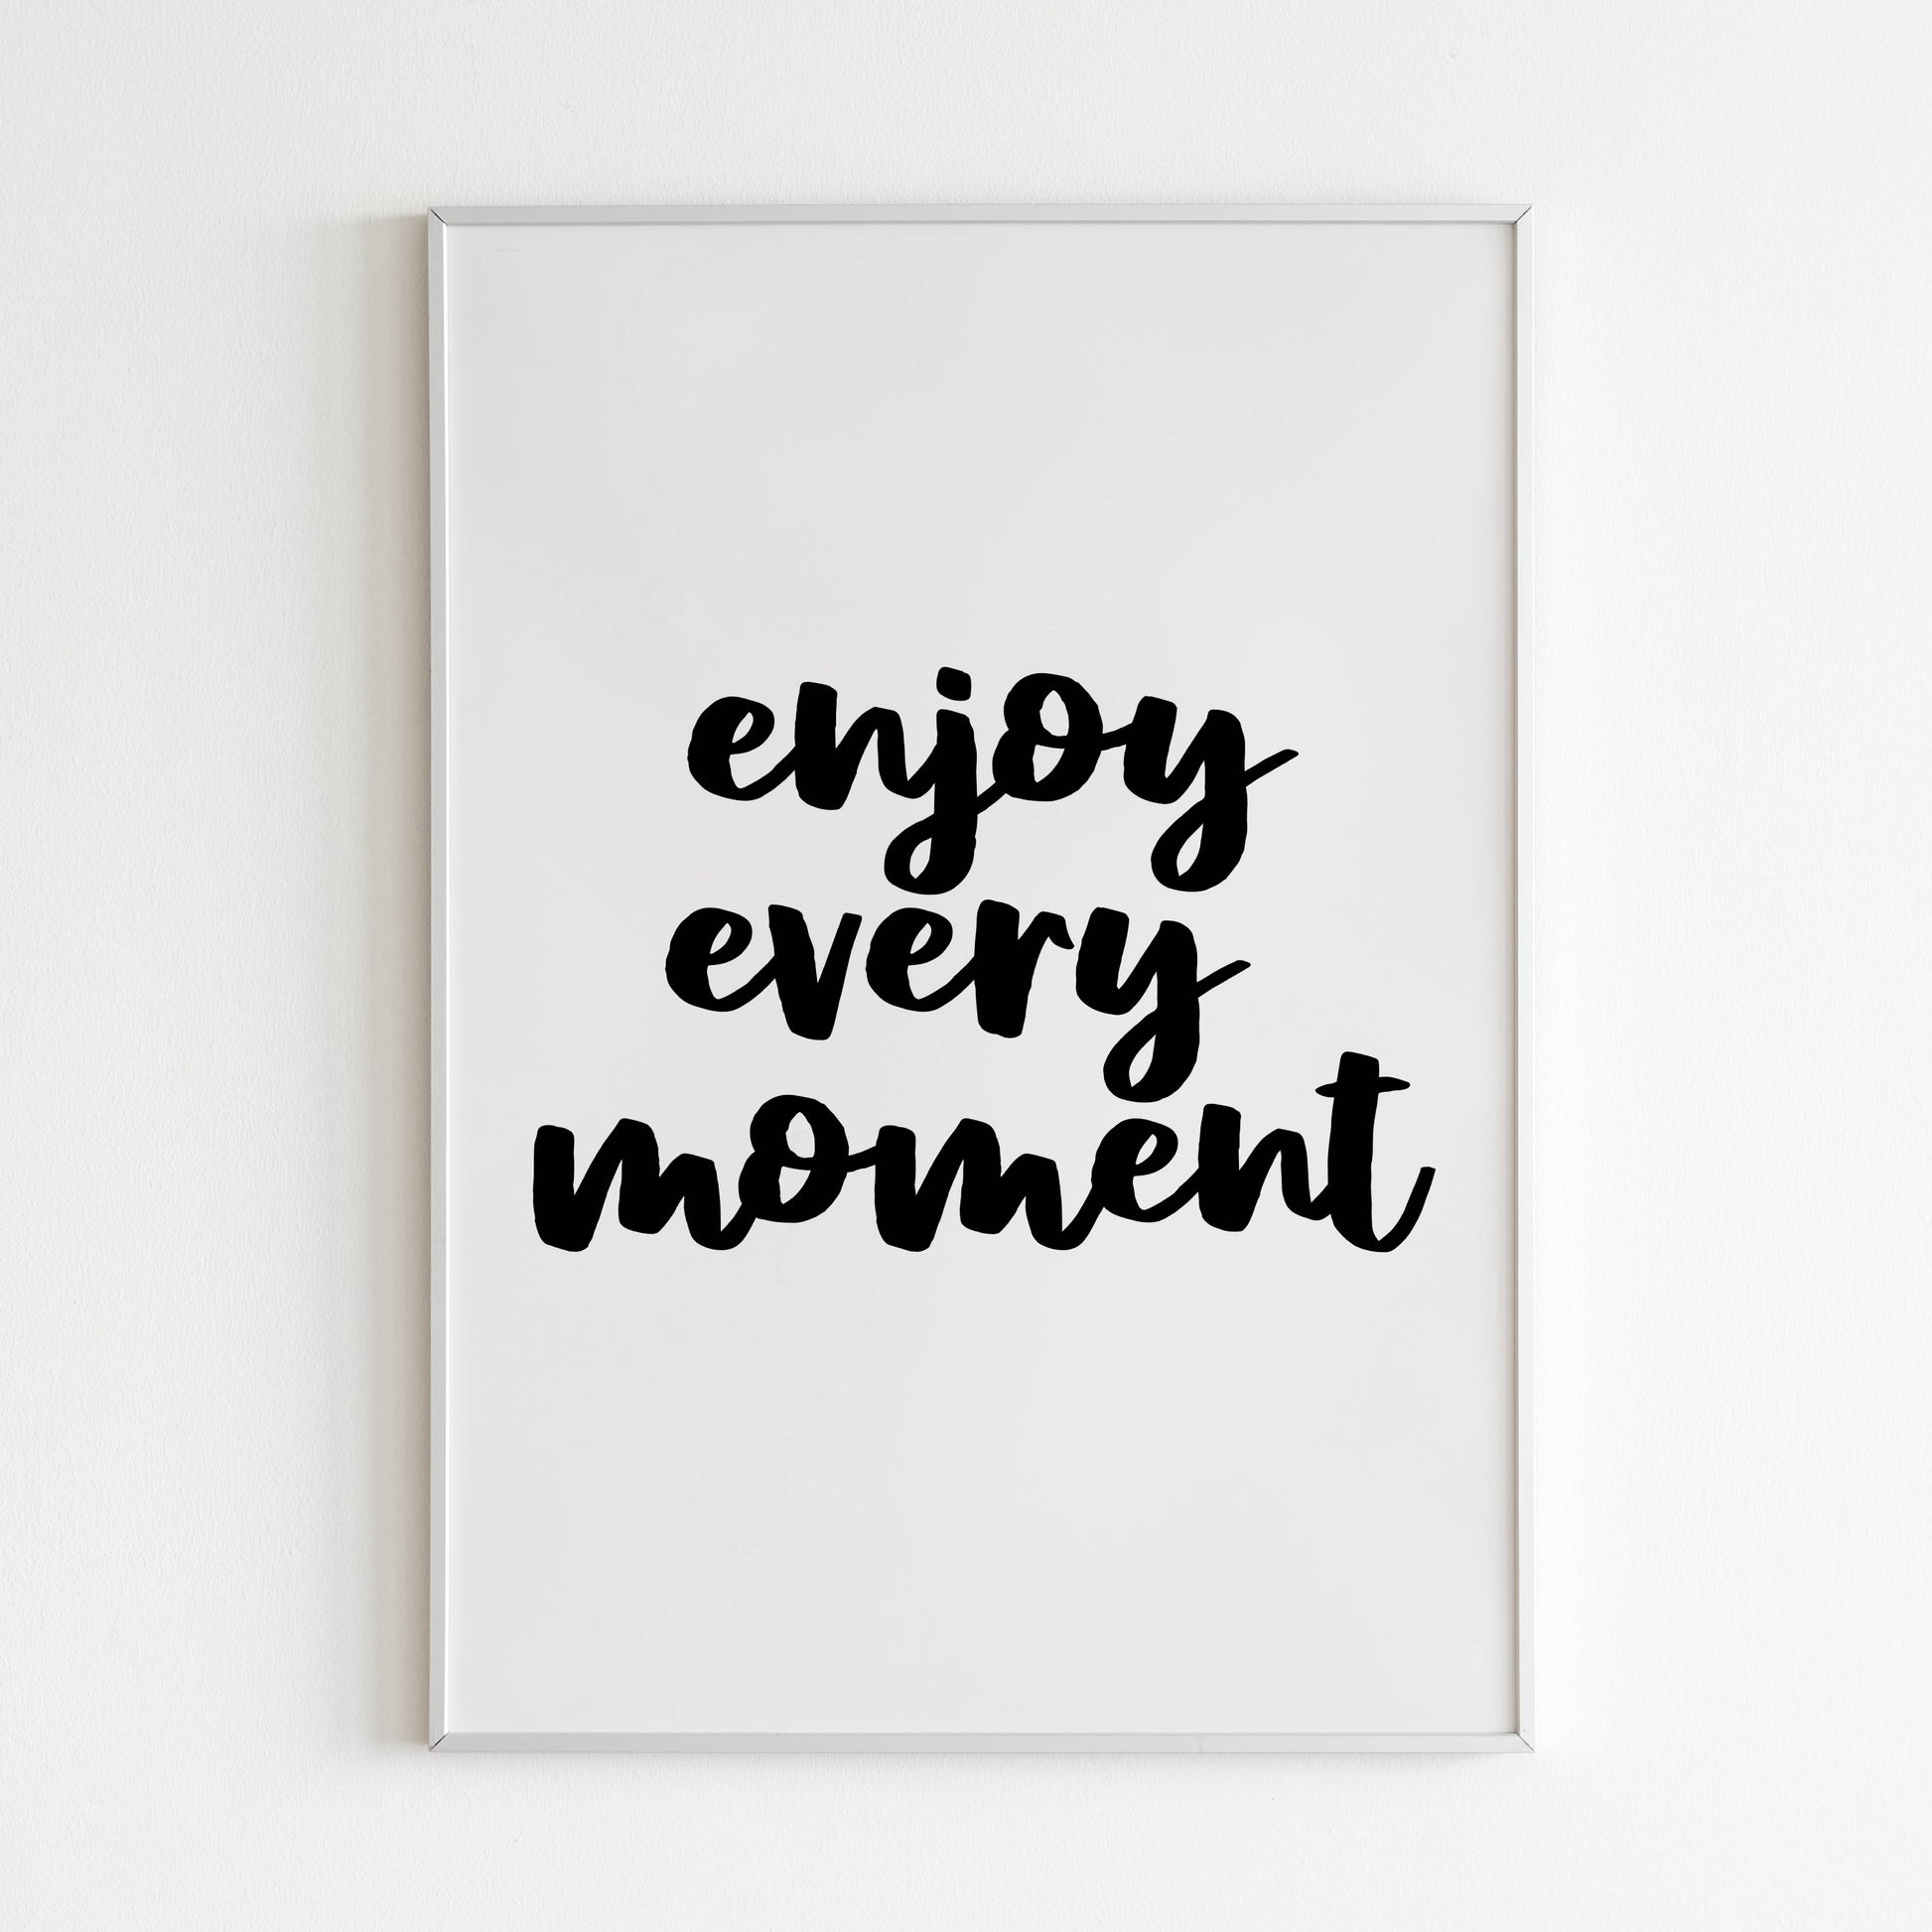 Downloadable "Enjoy every moment" art print, inspire mindfulness and appreciating the present.